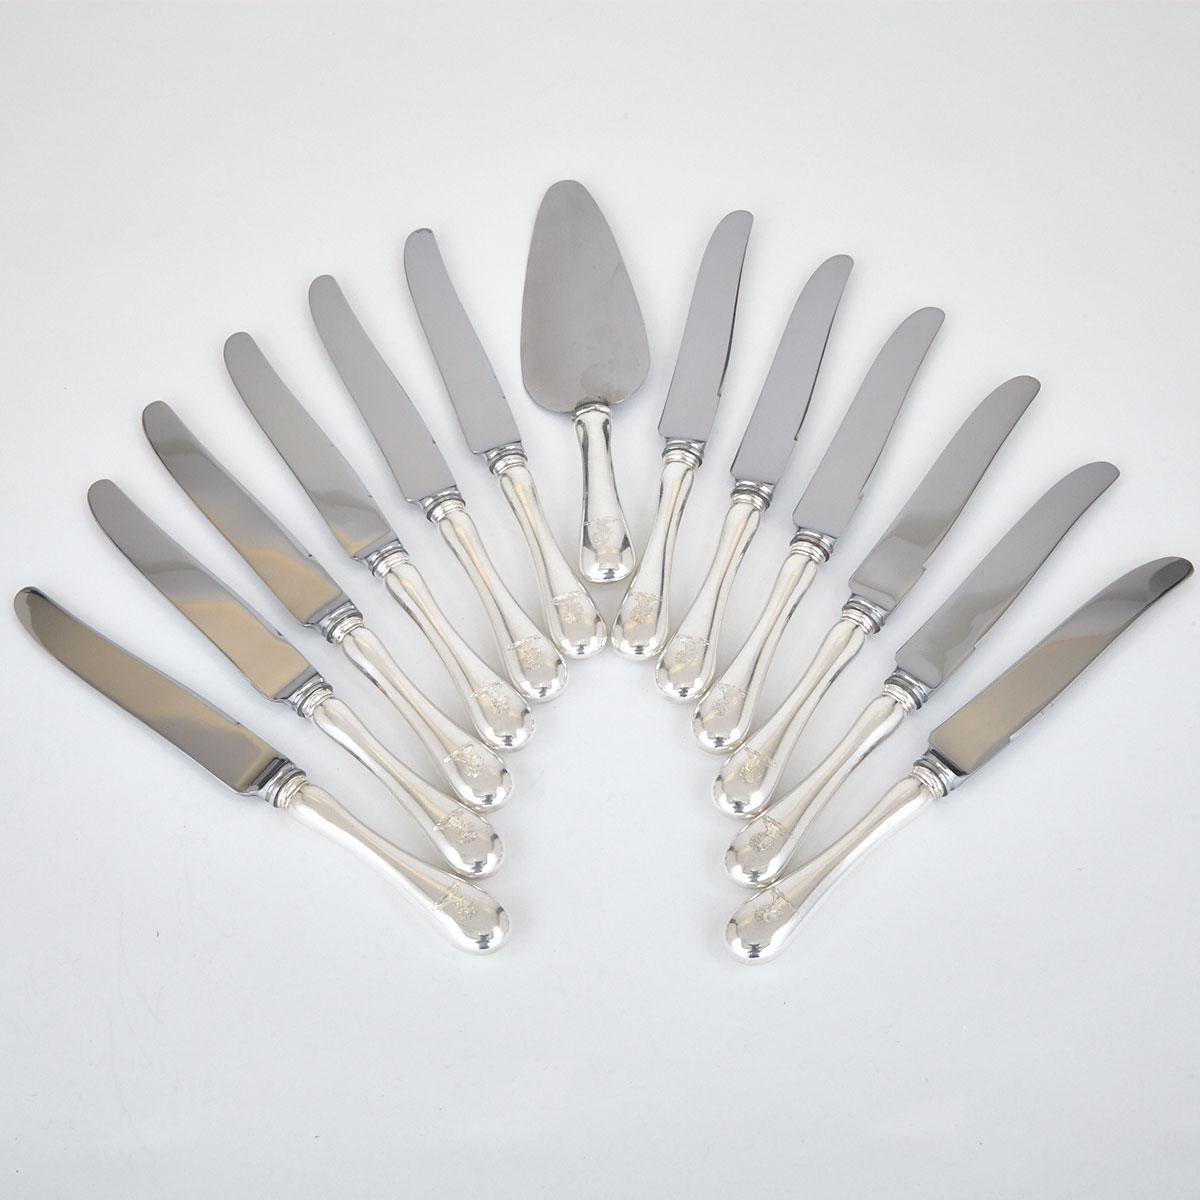 Twelve Canadian Old English Pattern Dinner Knives and a Pie Slice, Henry Birks & Sons, Montreal, Que., 20th century